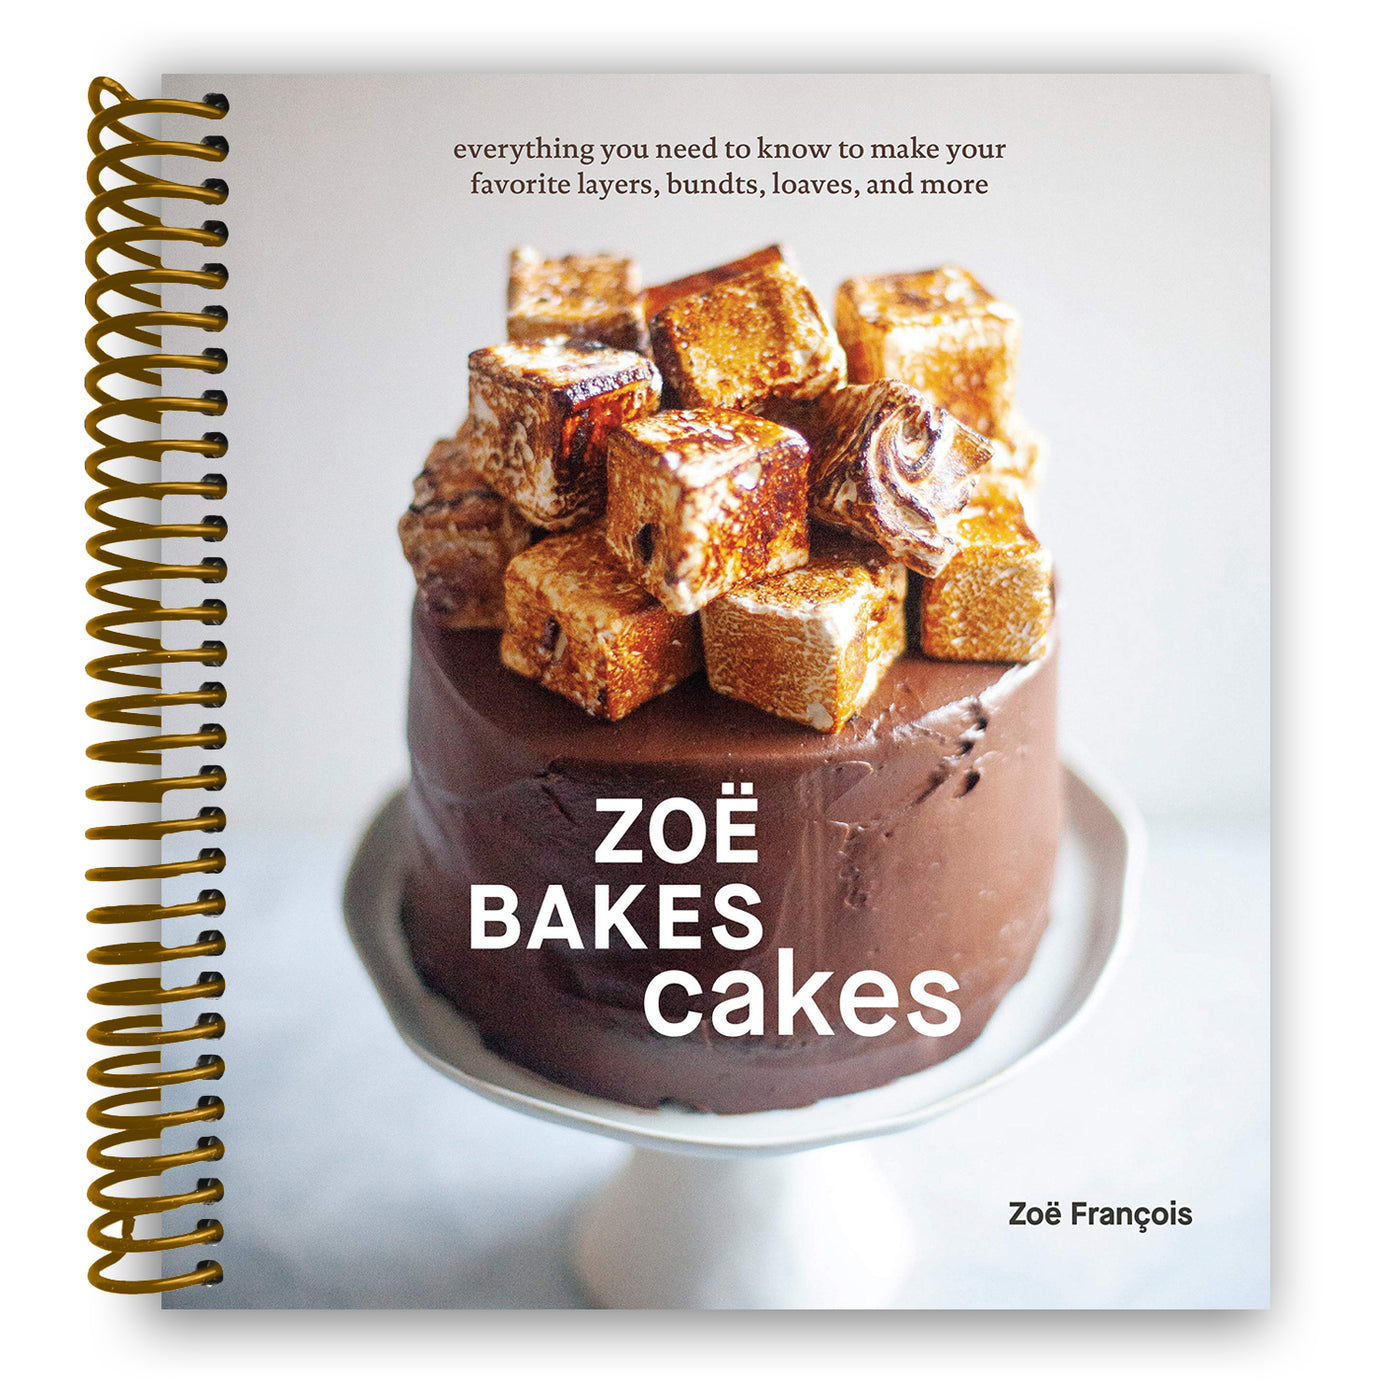 Zoë Bakes Cakes: Everything You Need to Know to Make Your Favorite Layers, Bundts, Loaves, and More (Spiral Bound)